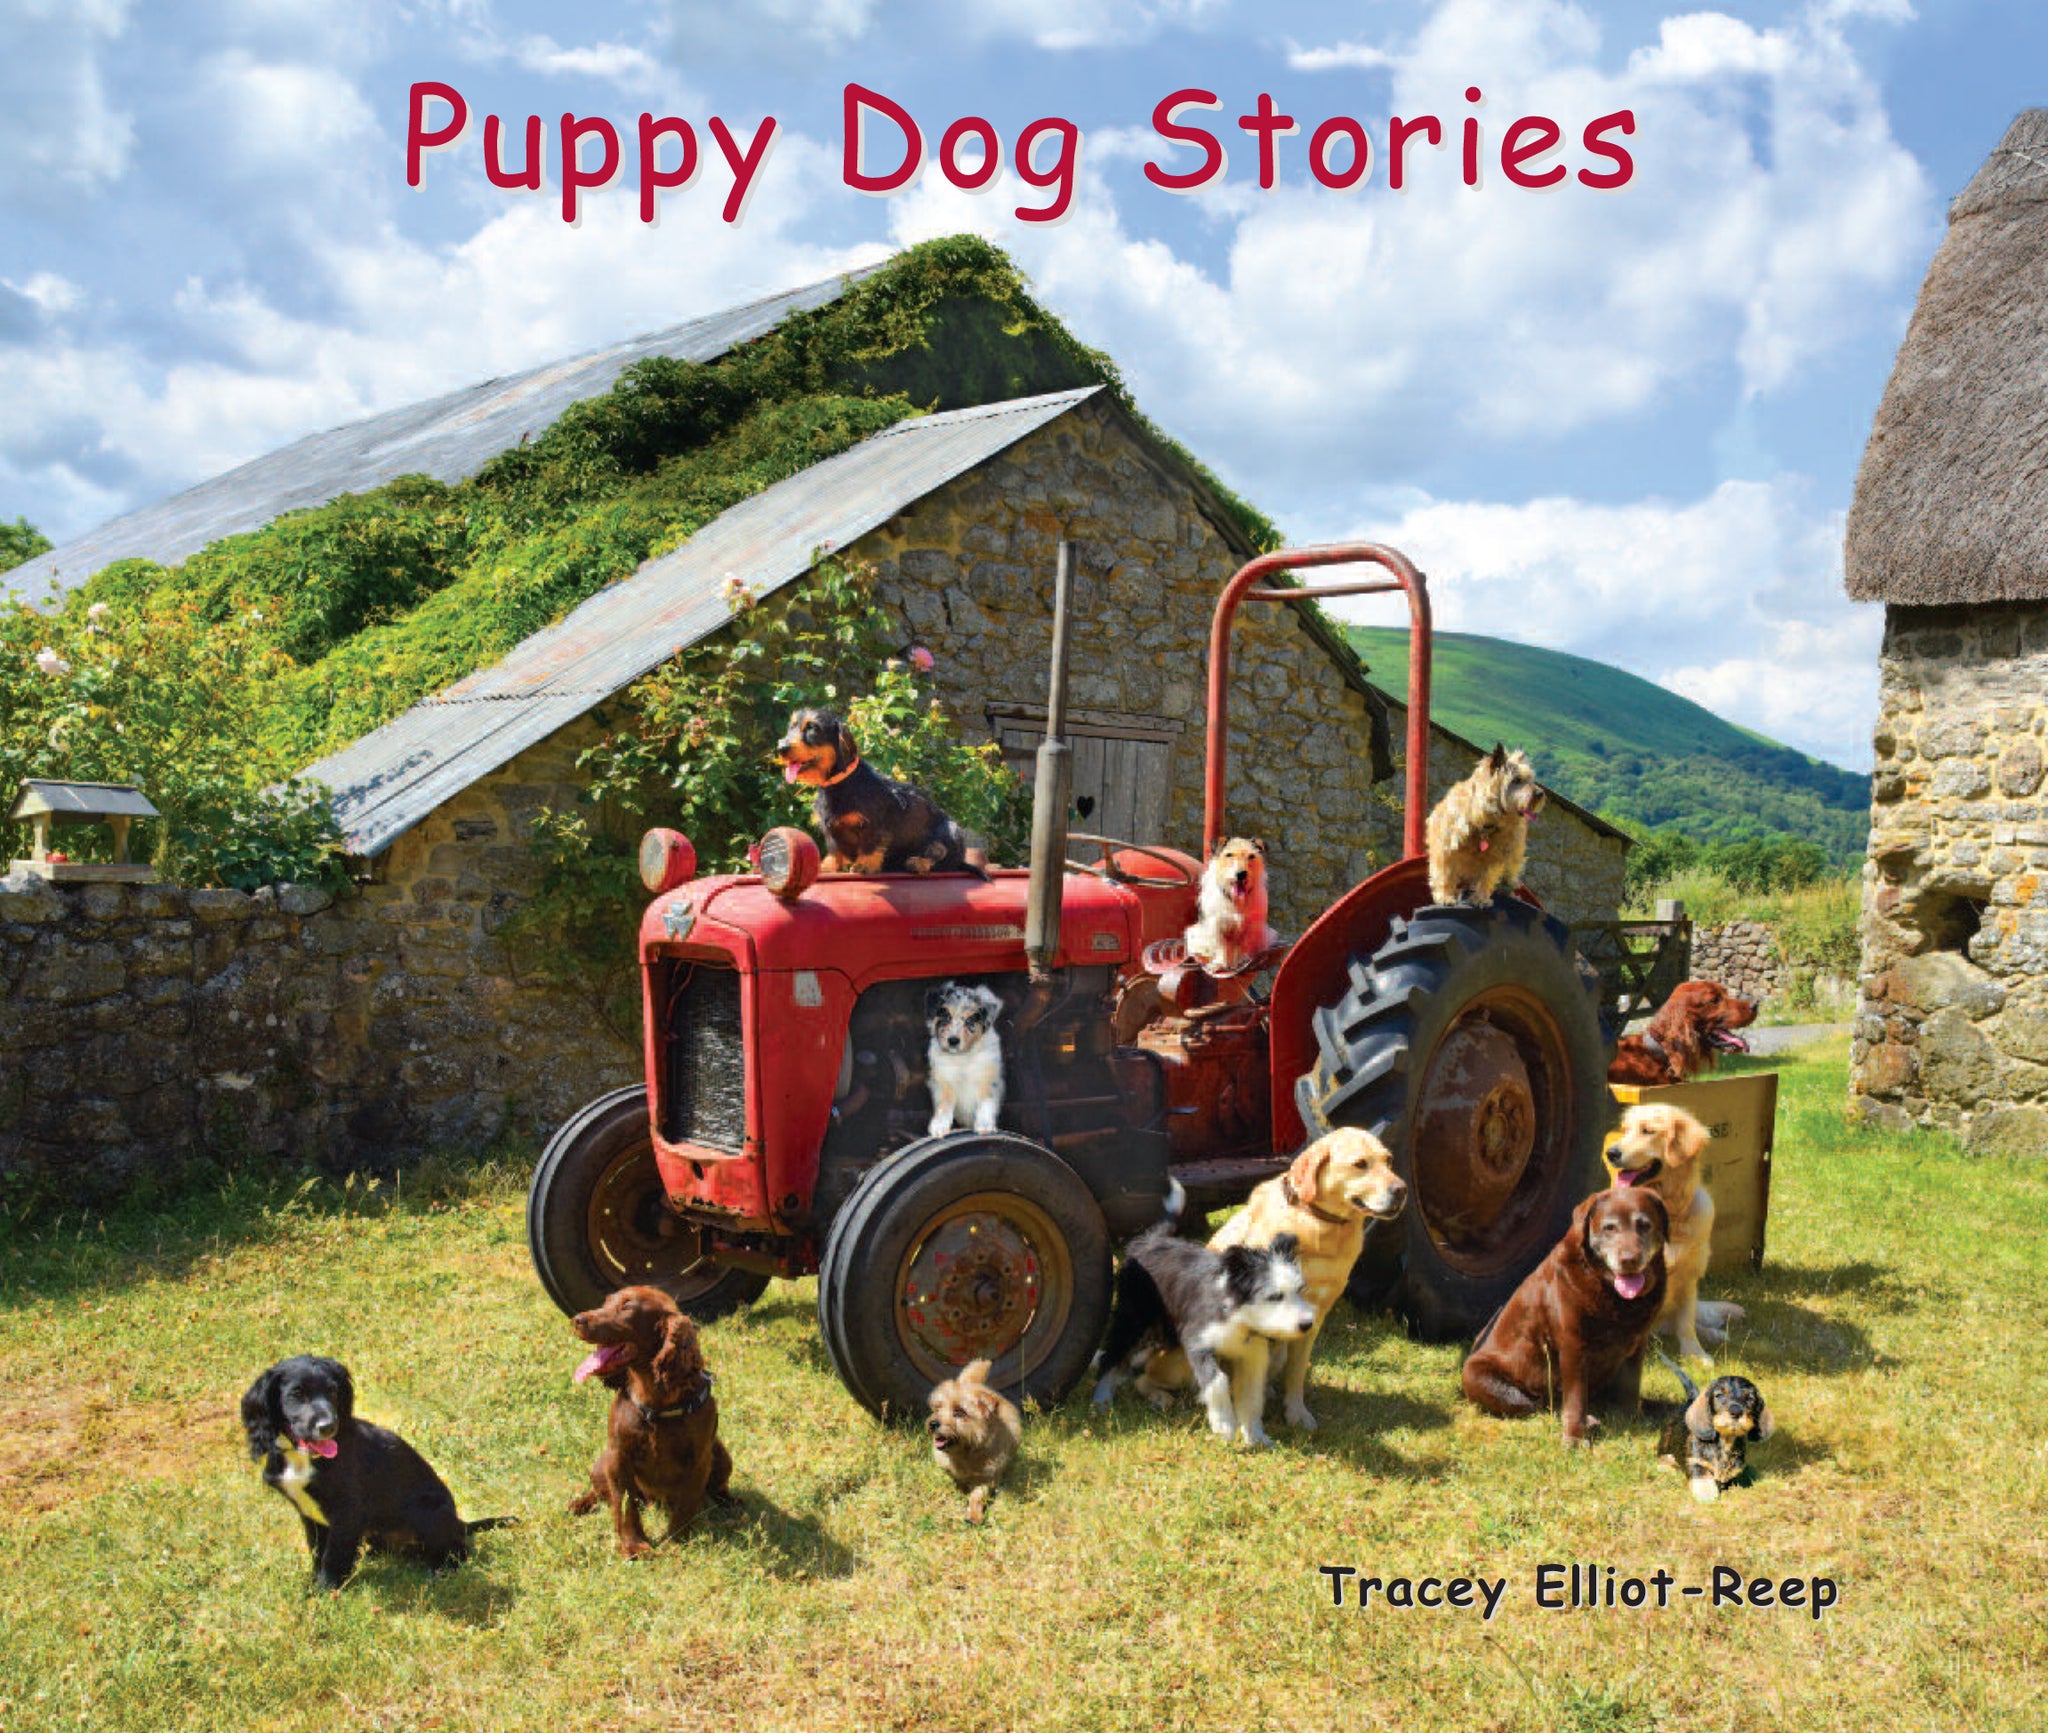 B024- Puppy Dog Stories - Boxset of all 5 Flexi-Cover Books Plus a free book 'A Day On Dartmoor with Rainbow the Pony' worth £5.95